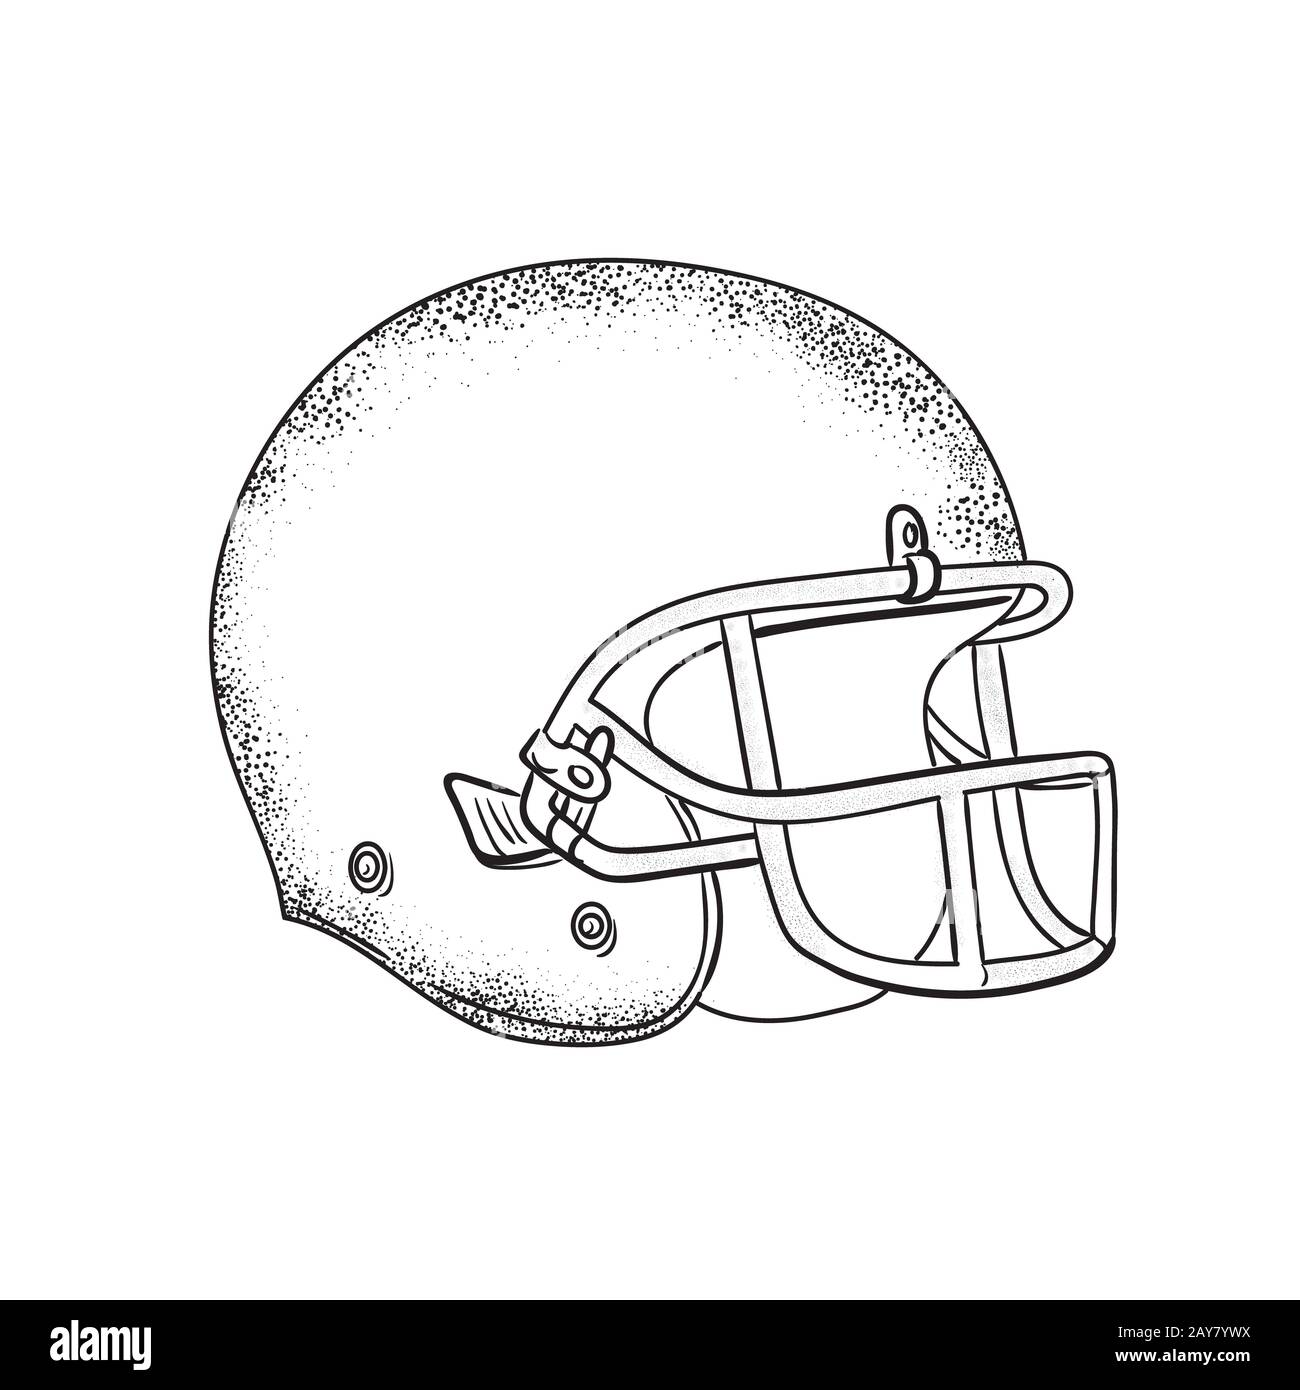 Football sketch for your design vector image on VectorStock | Football  drawing, Aesthetic drawing, Sketch book